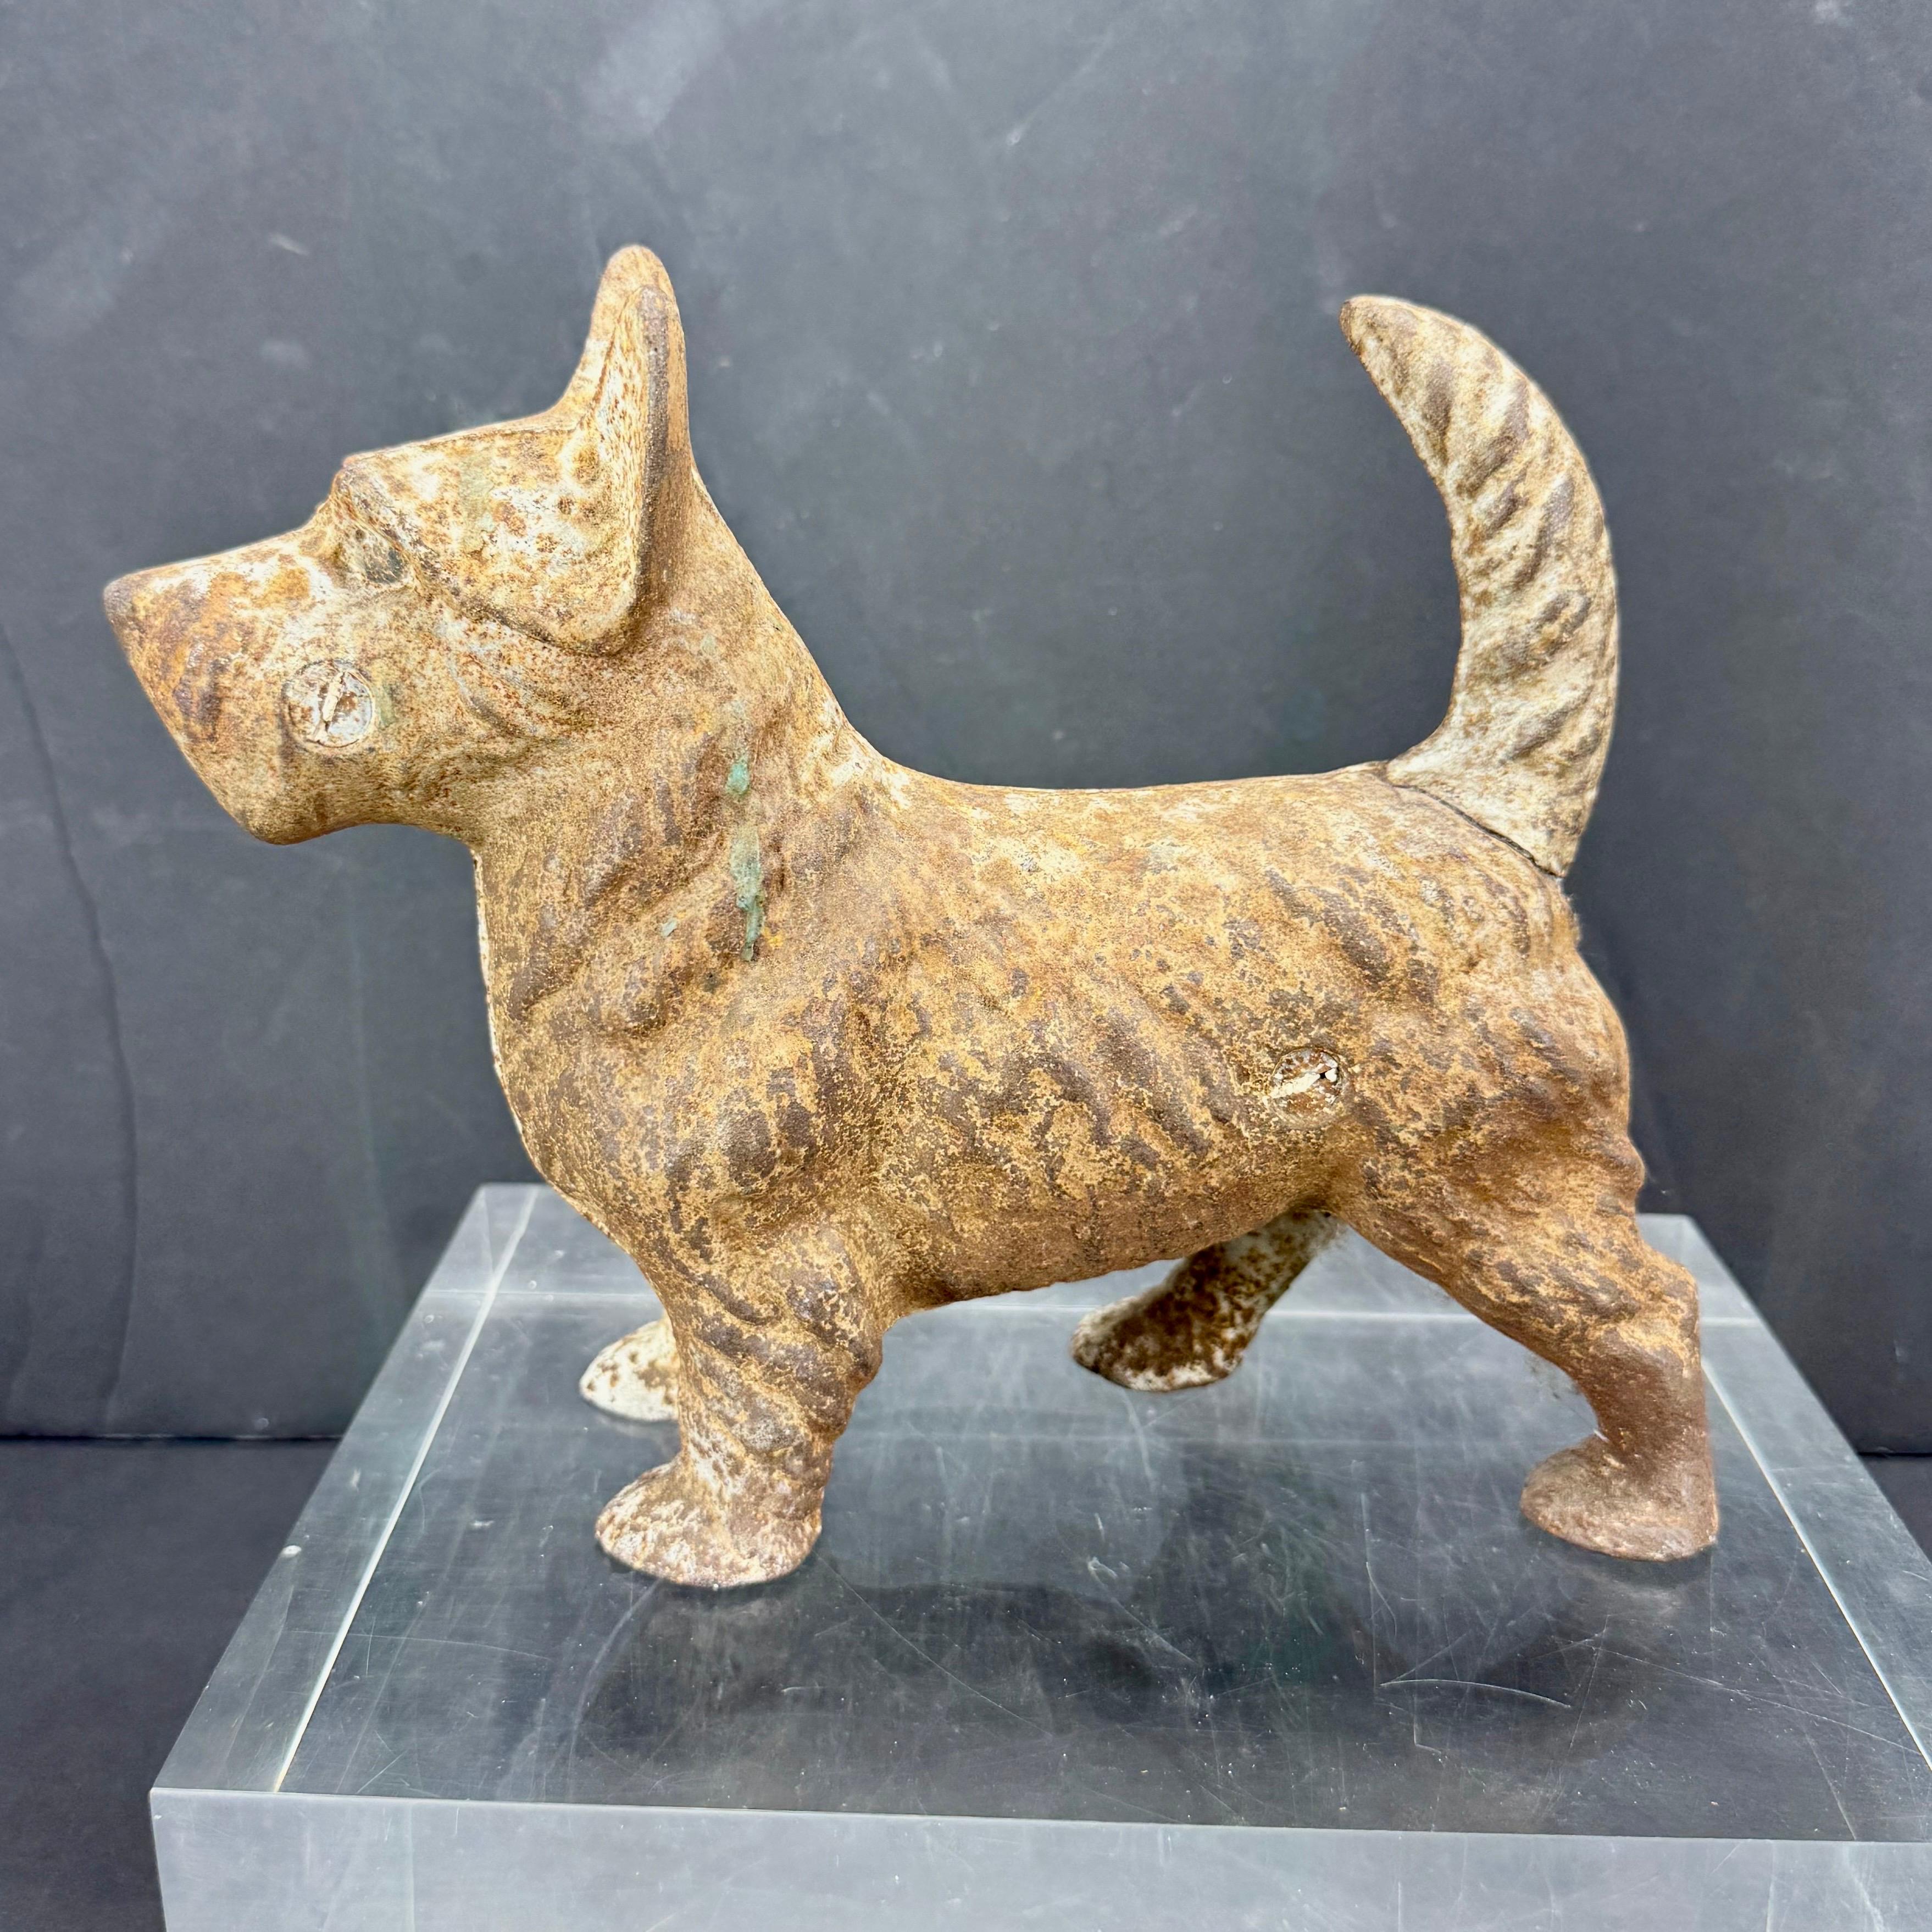 Cast Iron Doorstop Sculpture of a Scottish Terrier from England. This charming terrier has many functions. As a sculpture on a side table or used to keep open a door and add character to your home. Wonderful gift to add to a collection of these